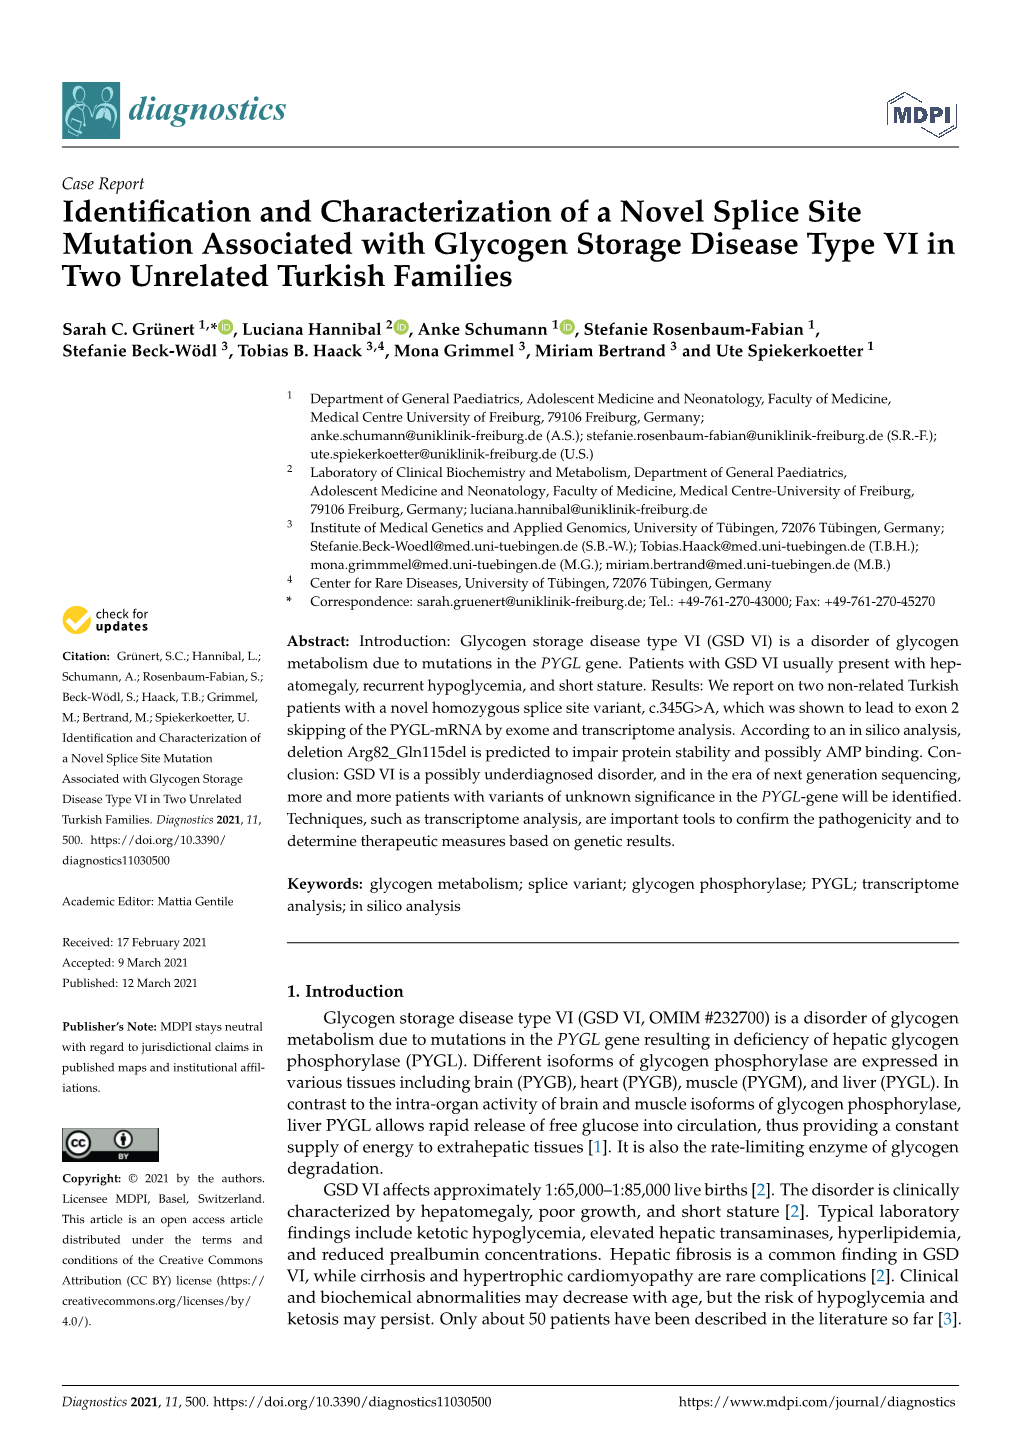 Identification and Characterization of a Novel Splice Site Mutation Associated with Glycogen Storage Disease Type VI in Two Unre